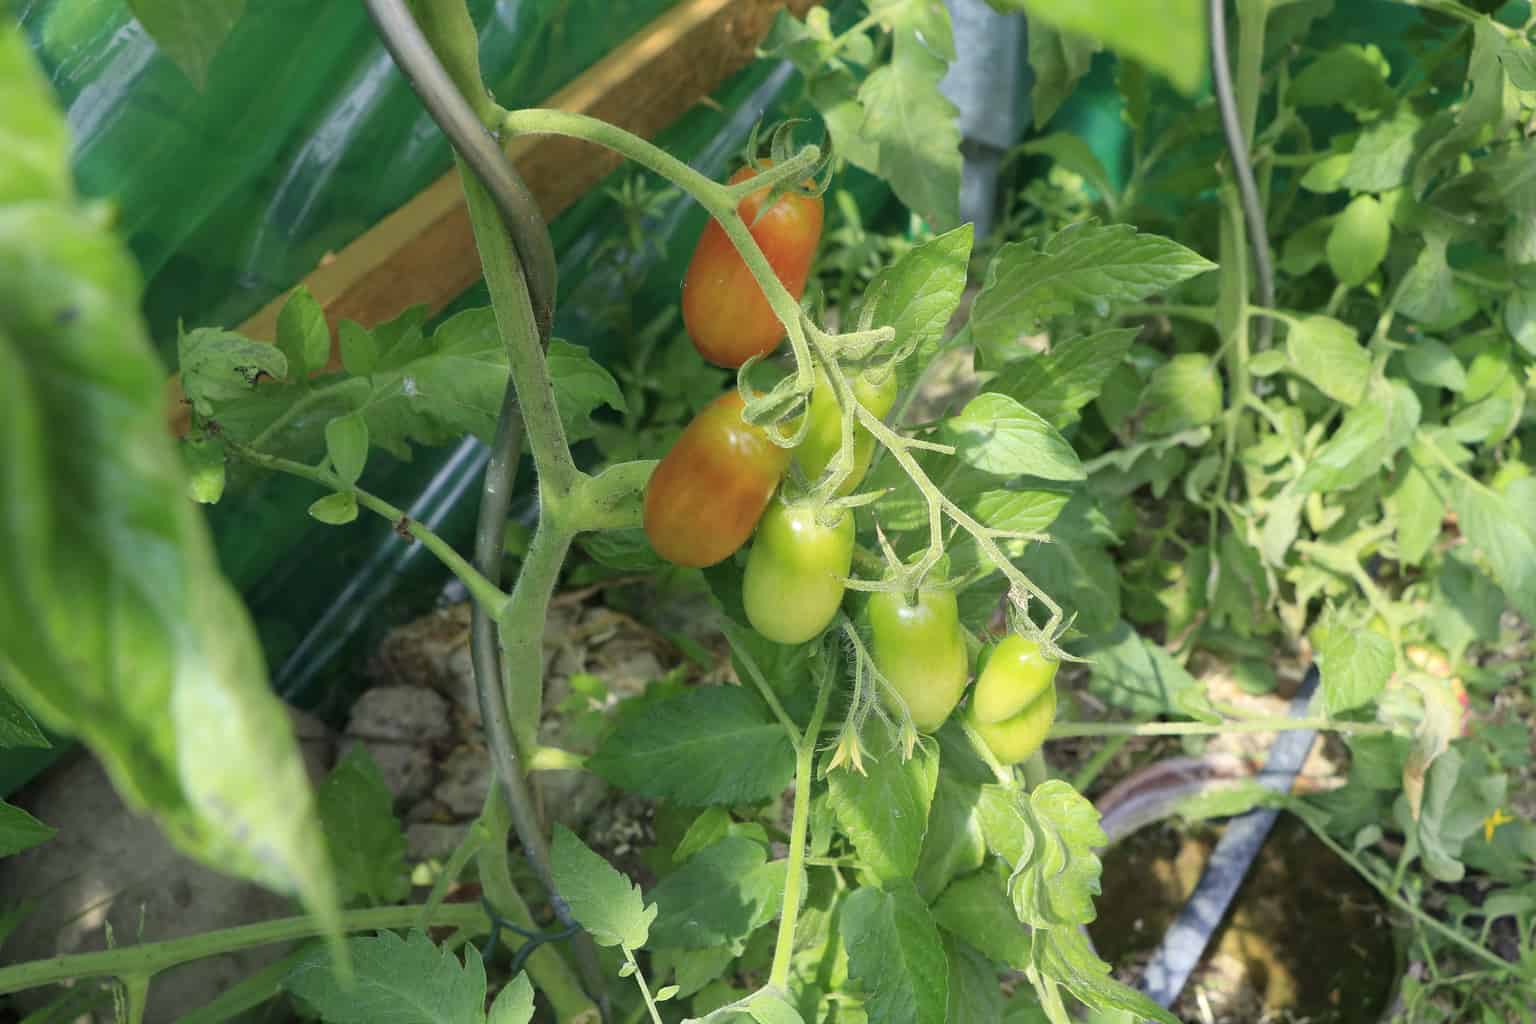 Ripening Tomatoes in the Tomato house